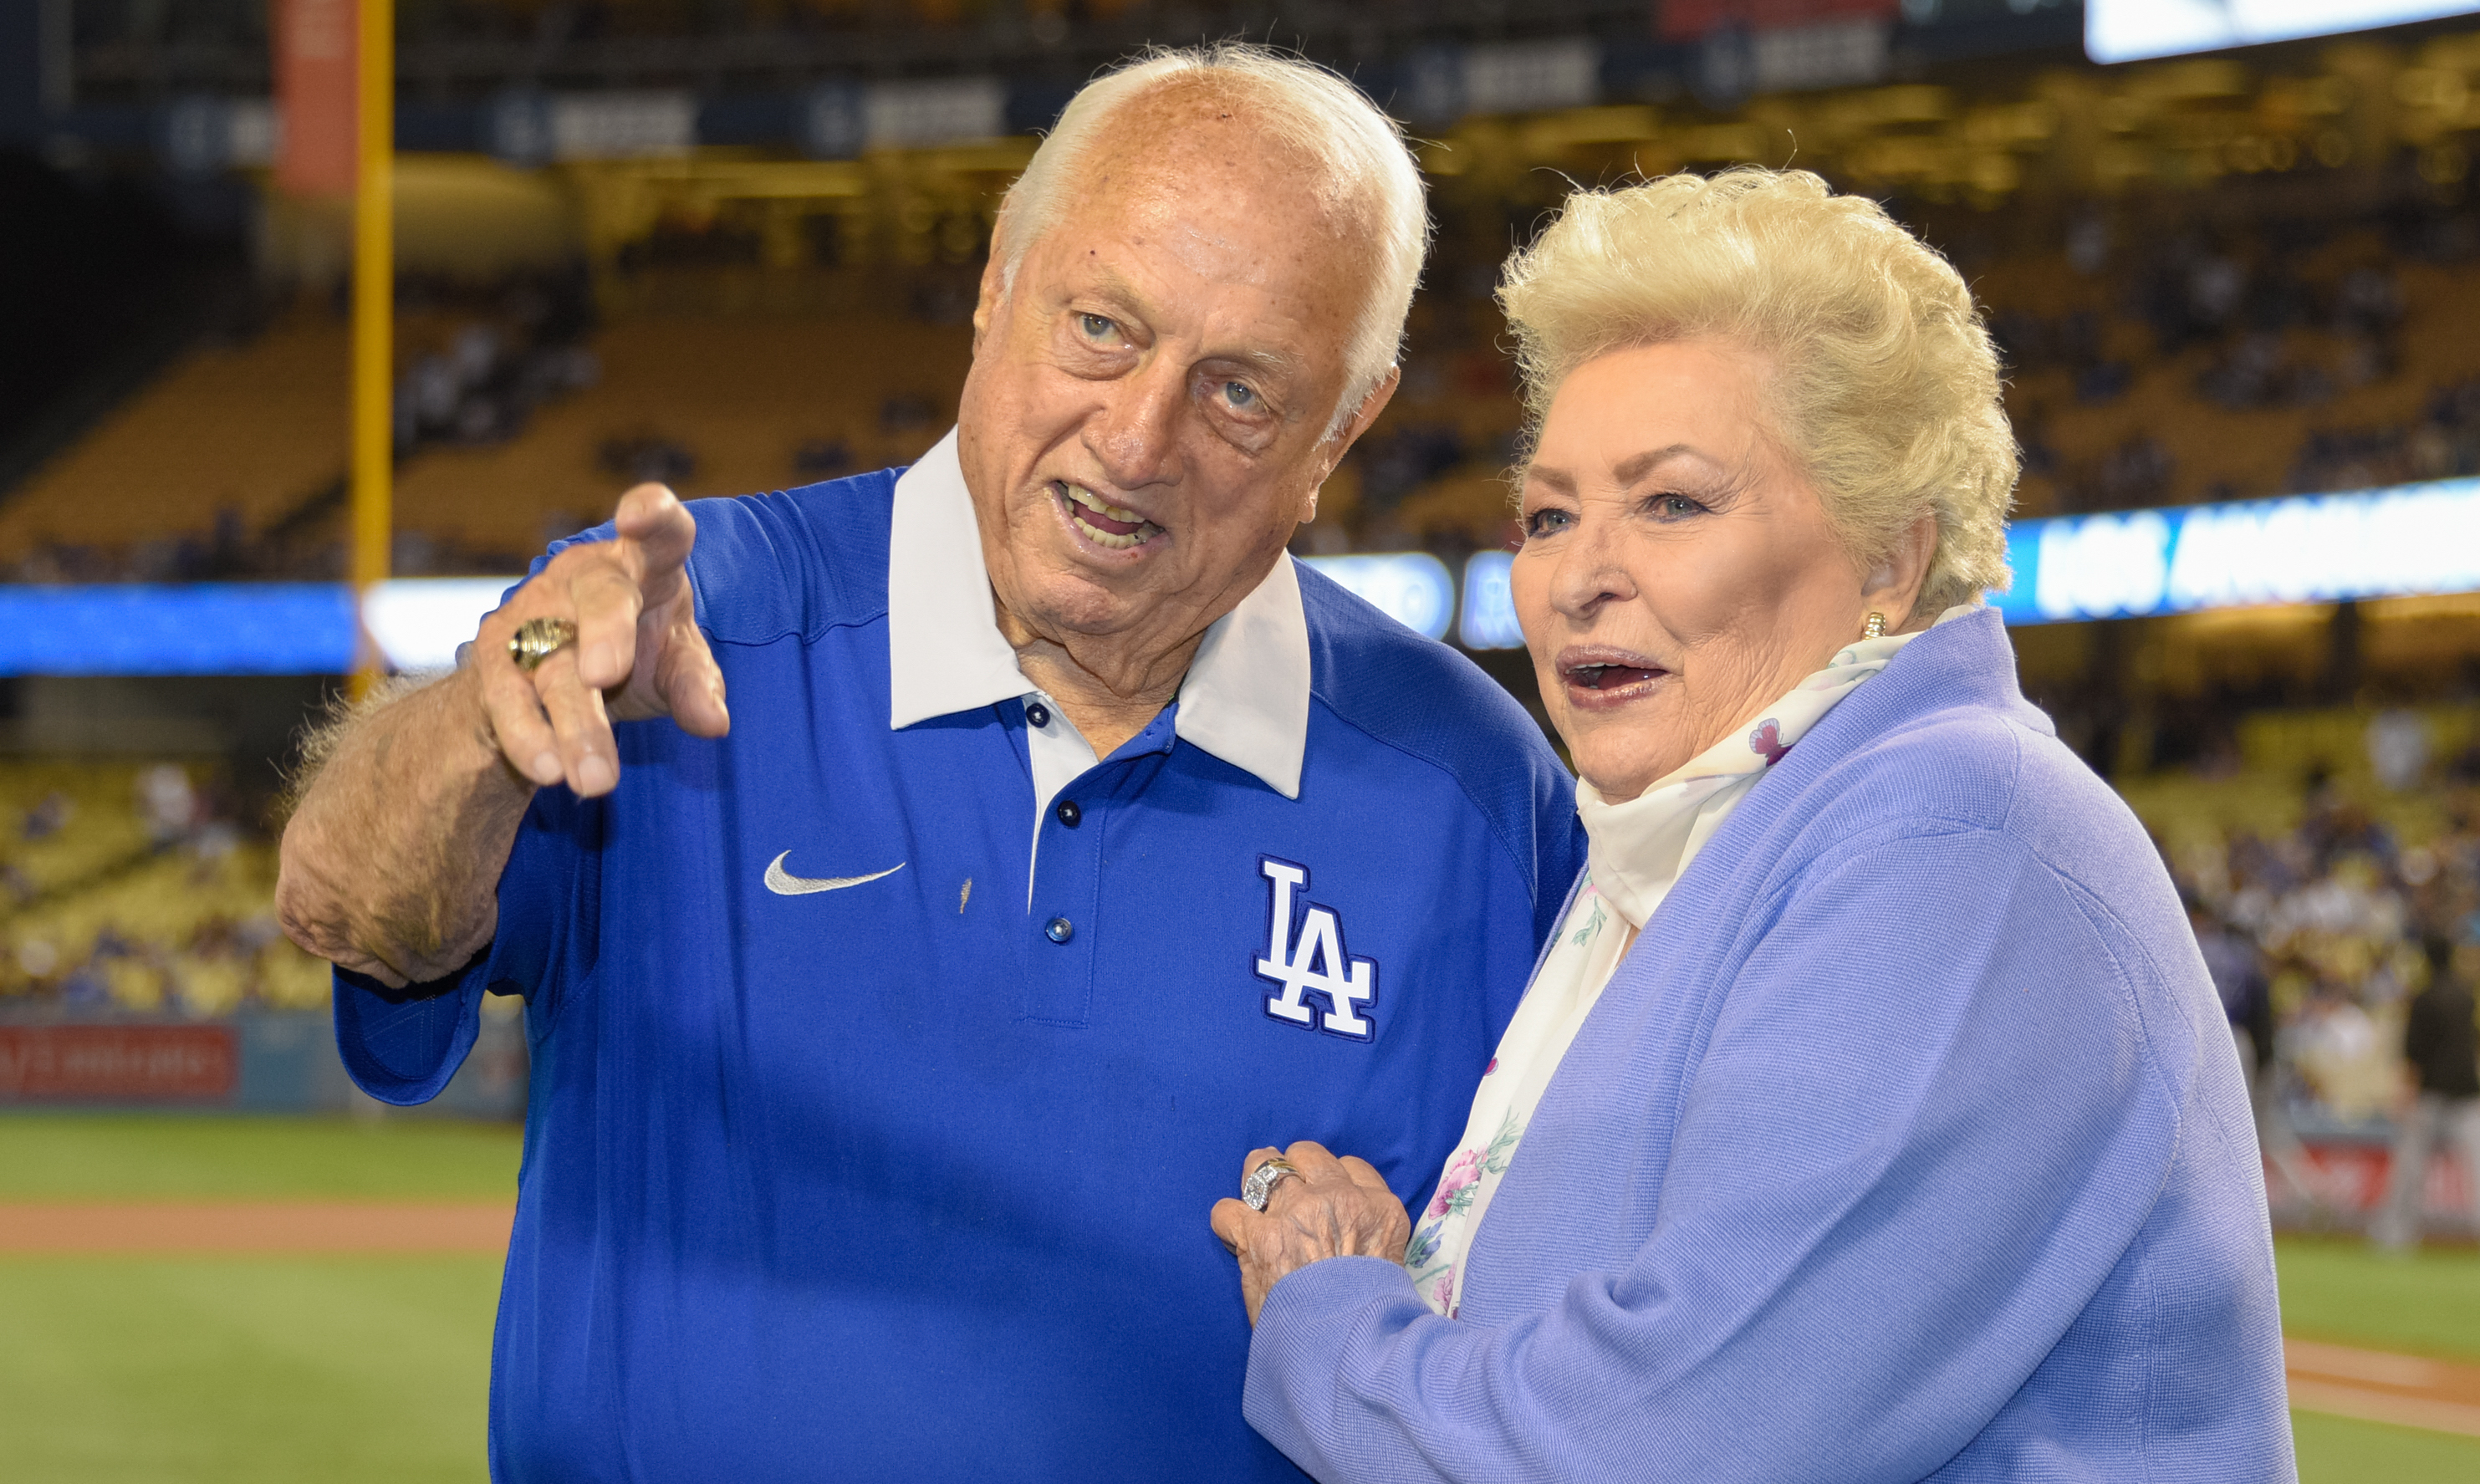 Jo Lasorda, Widow of Dodgers Hall of Fame Manager Tommy Lasorda, Dies at 91